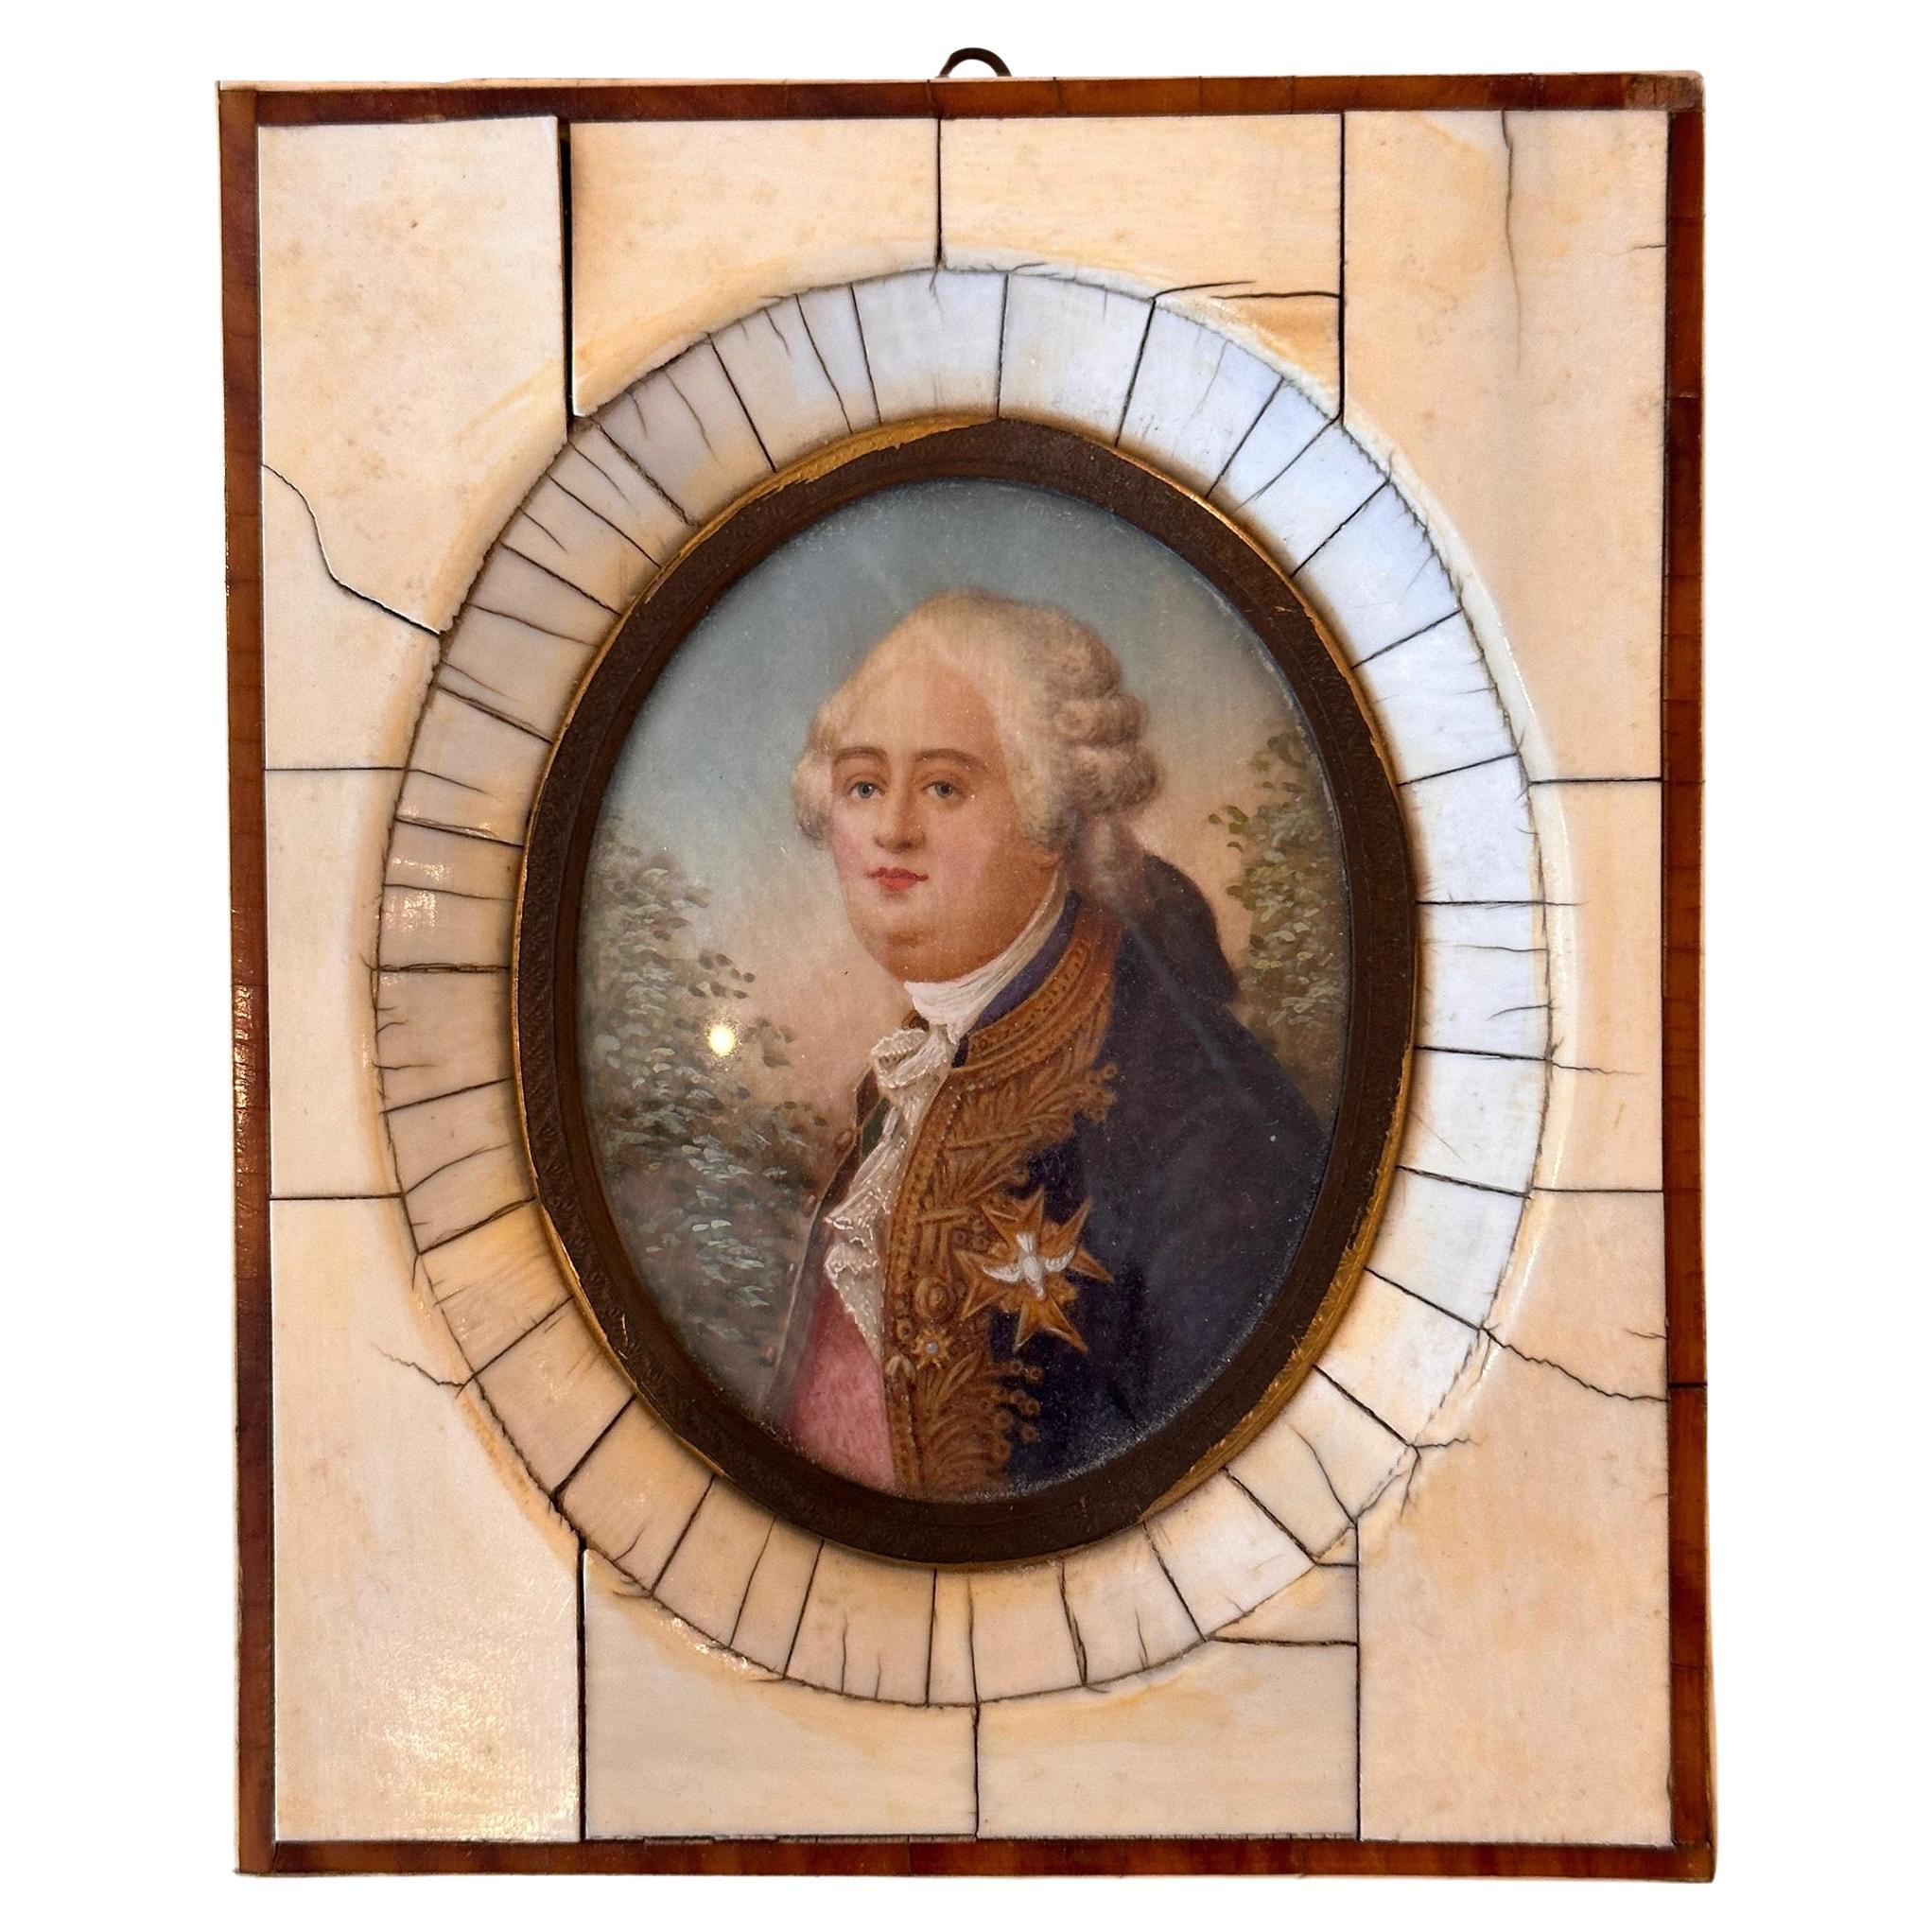 Mid 19th Century French Nobleman Miniature Portrait Painting